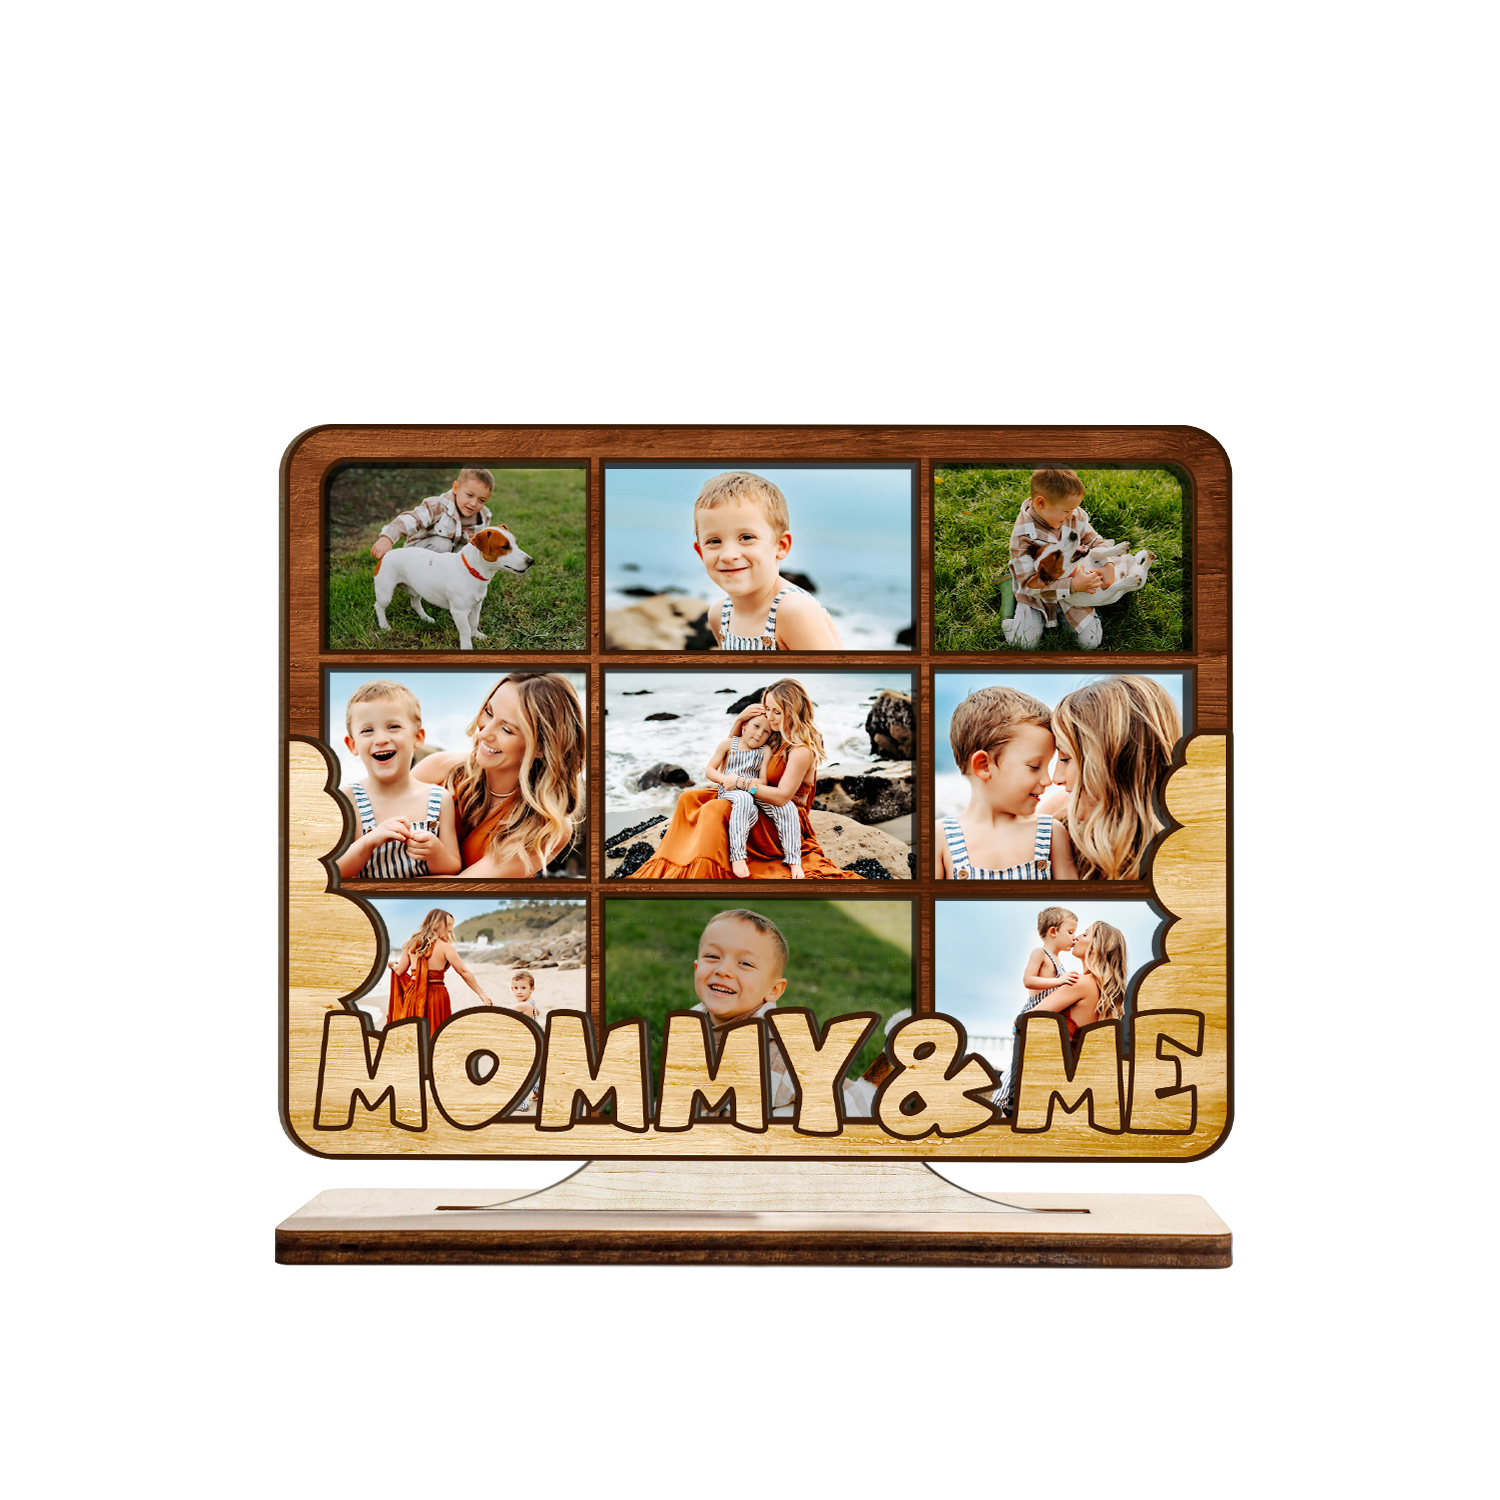 Mommy And Me, Custom Photo, Wooden Plaque 3 Layers